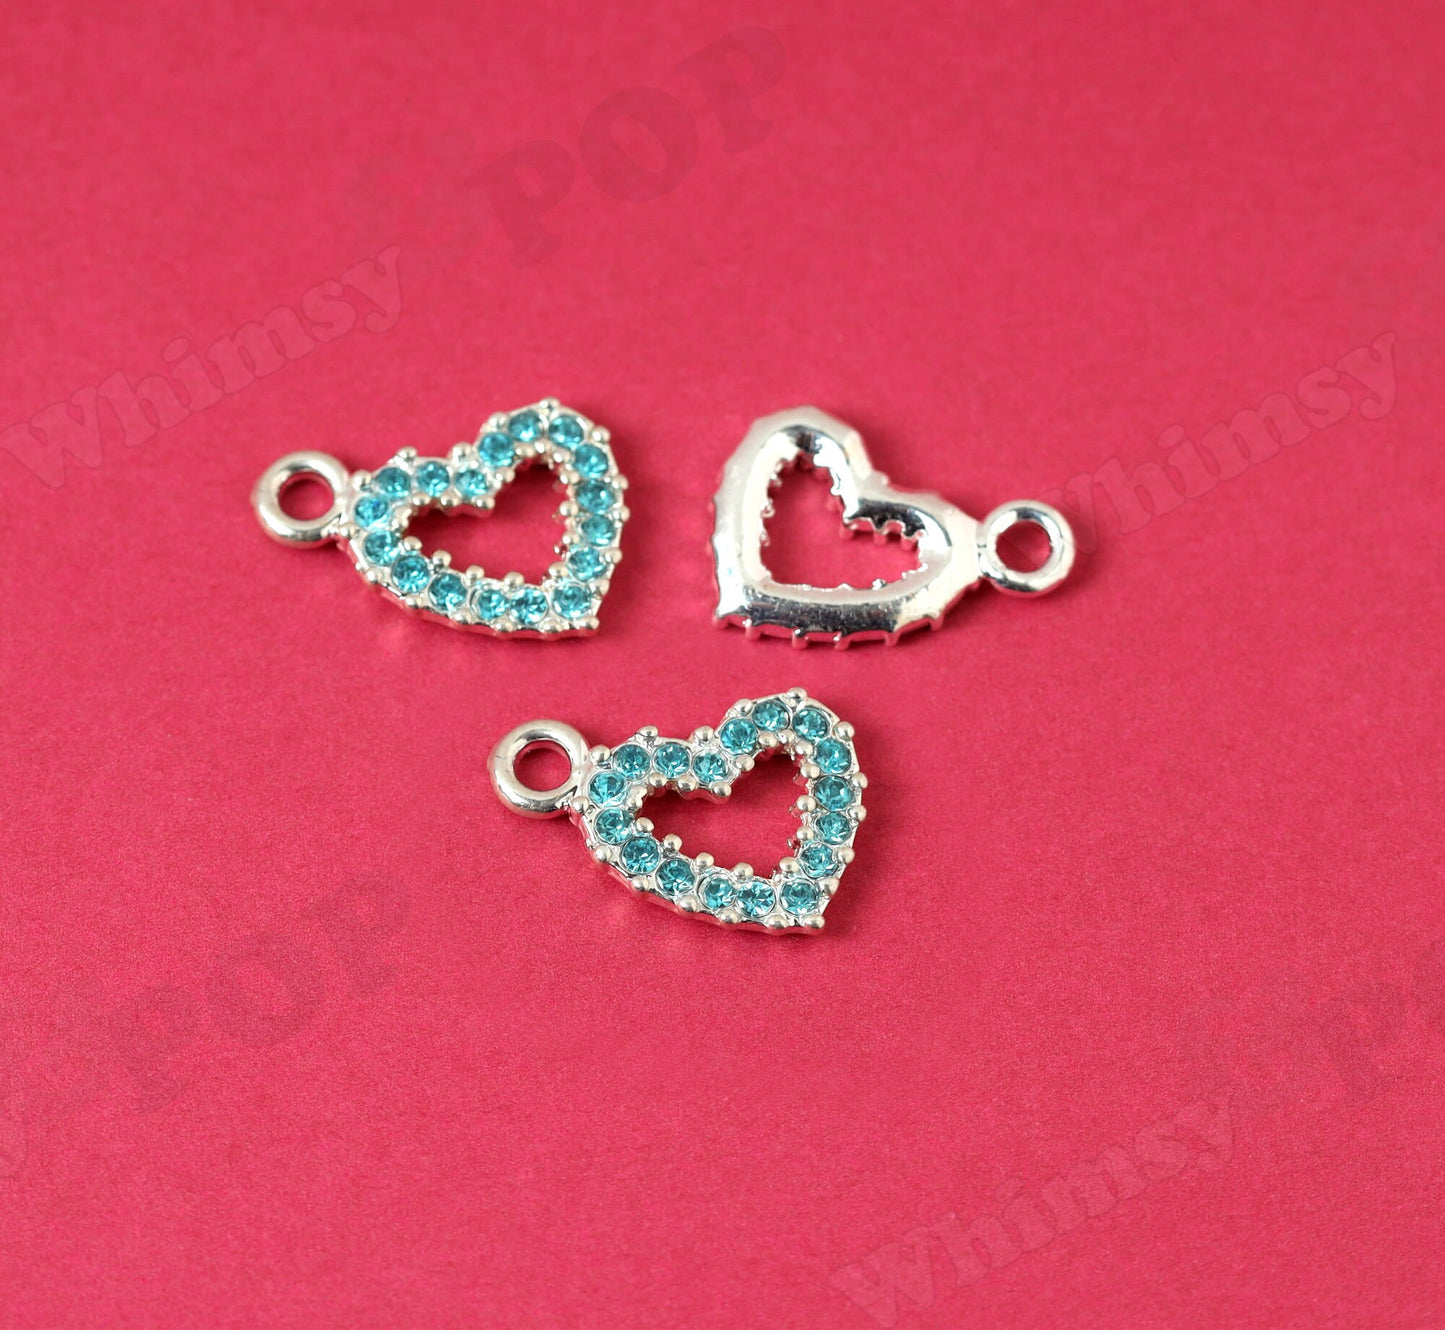 Aqua Heart Charms in Many Colors for DIY Jewelry